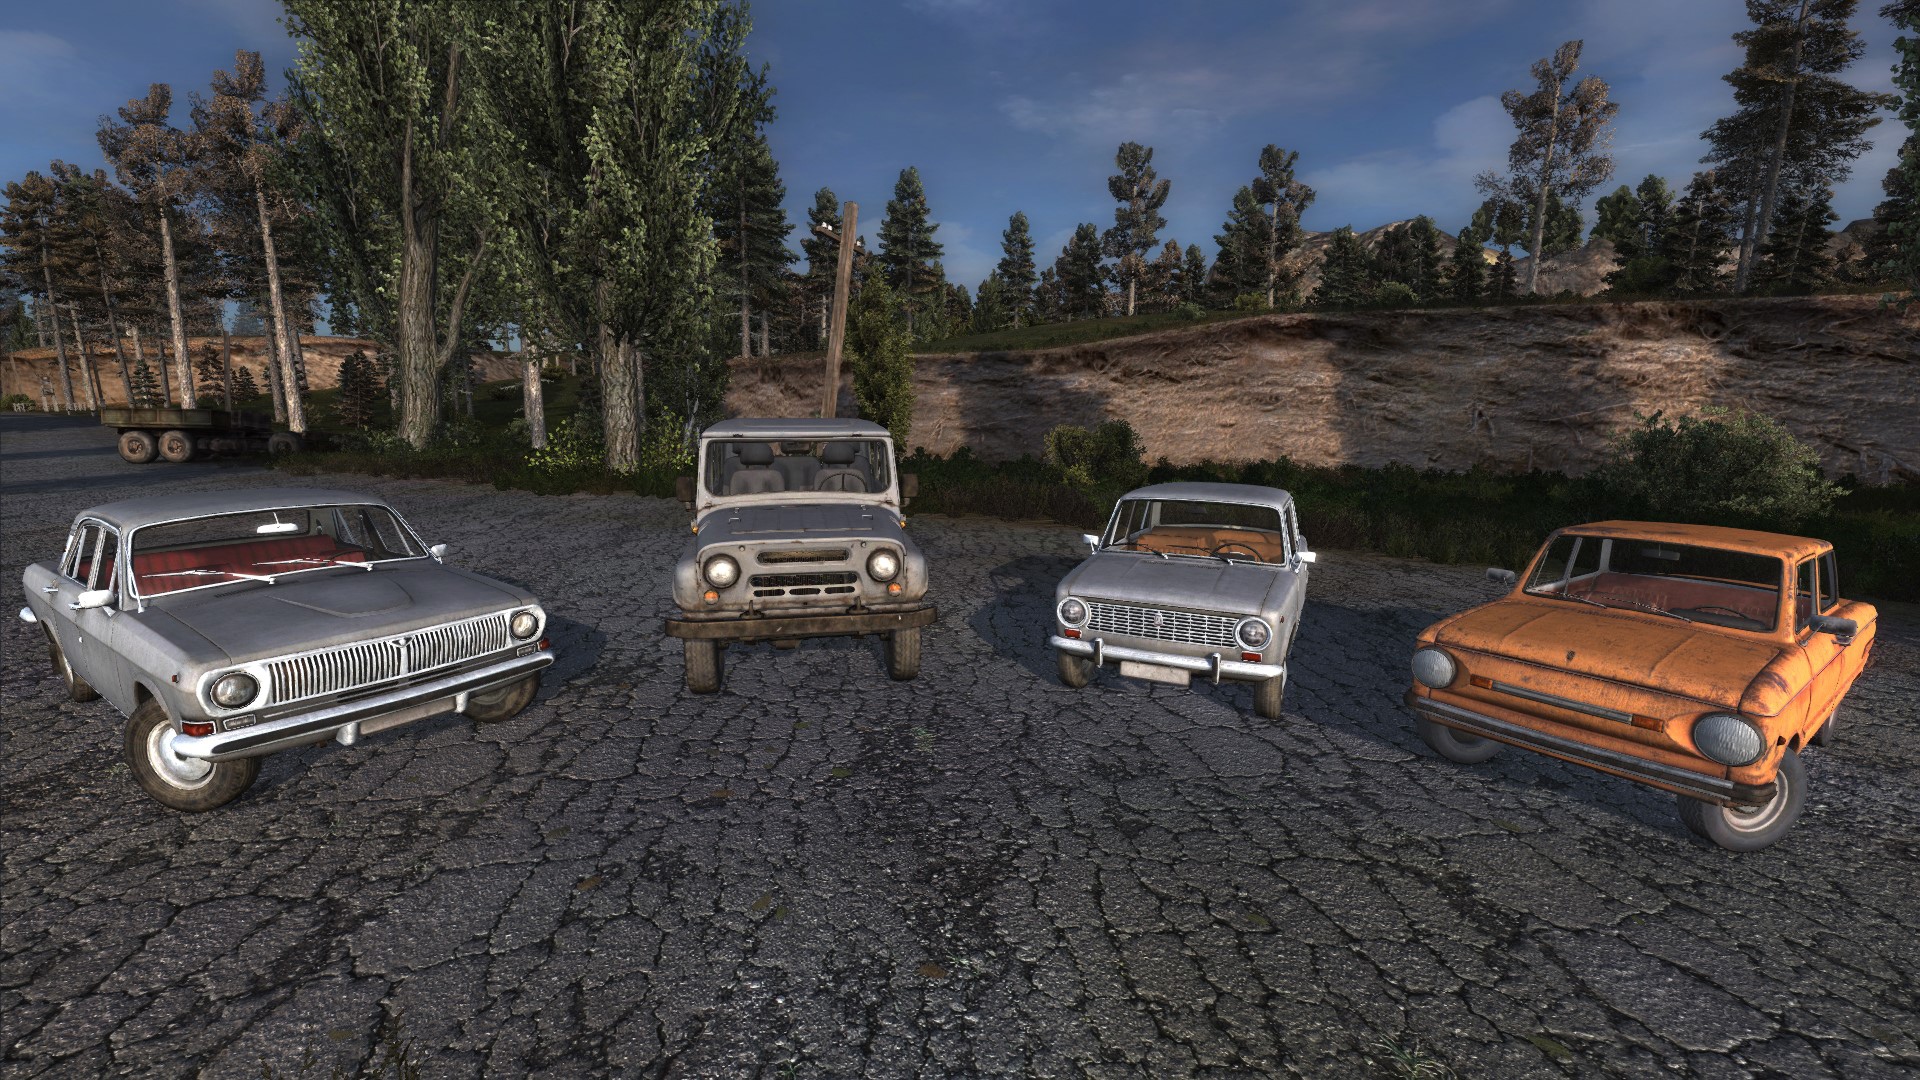 Lost alpha definitive car pack addon. Definitive car Pack Addon. Сталкер транспорт. Дефинитив кар пак аддон. Definitive car Pack Lost.